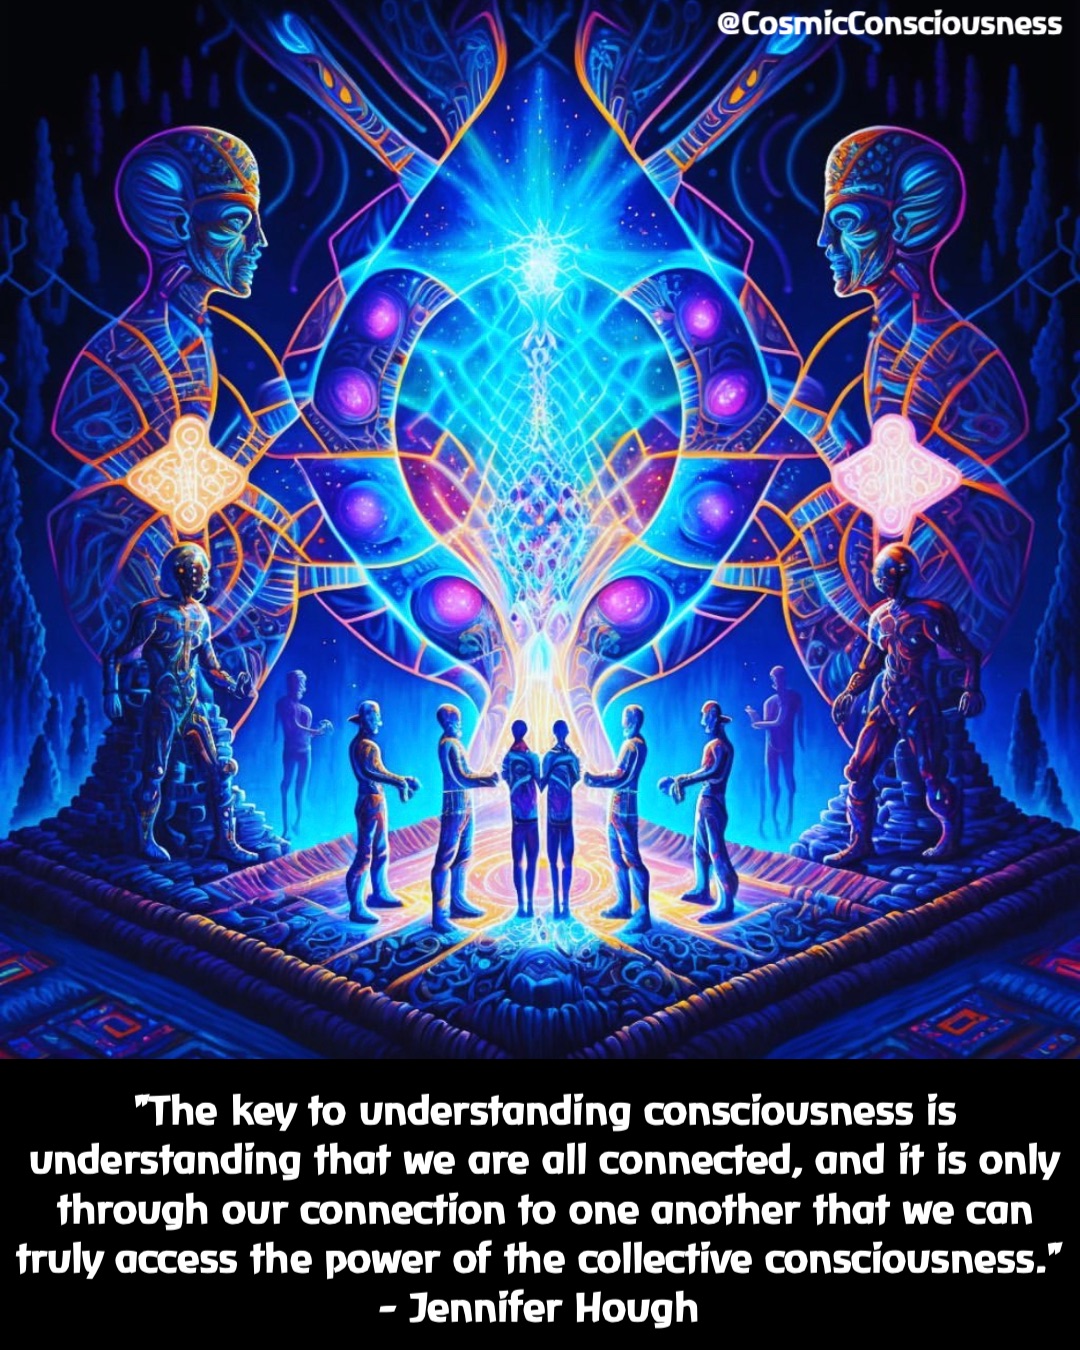 "The key to understanding consciousness is understanding that we are all connected, and it is only through our connection to one another that we can truly access the power of the collective consciousness." 
- Jennifer Hough @CosmicConsciousness